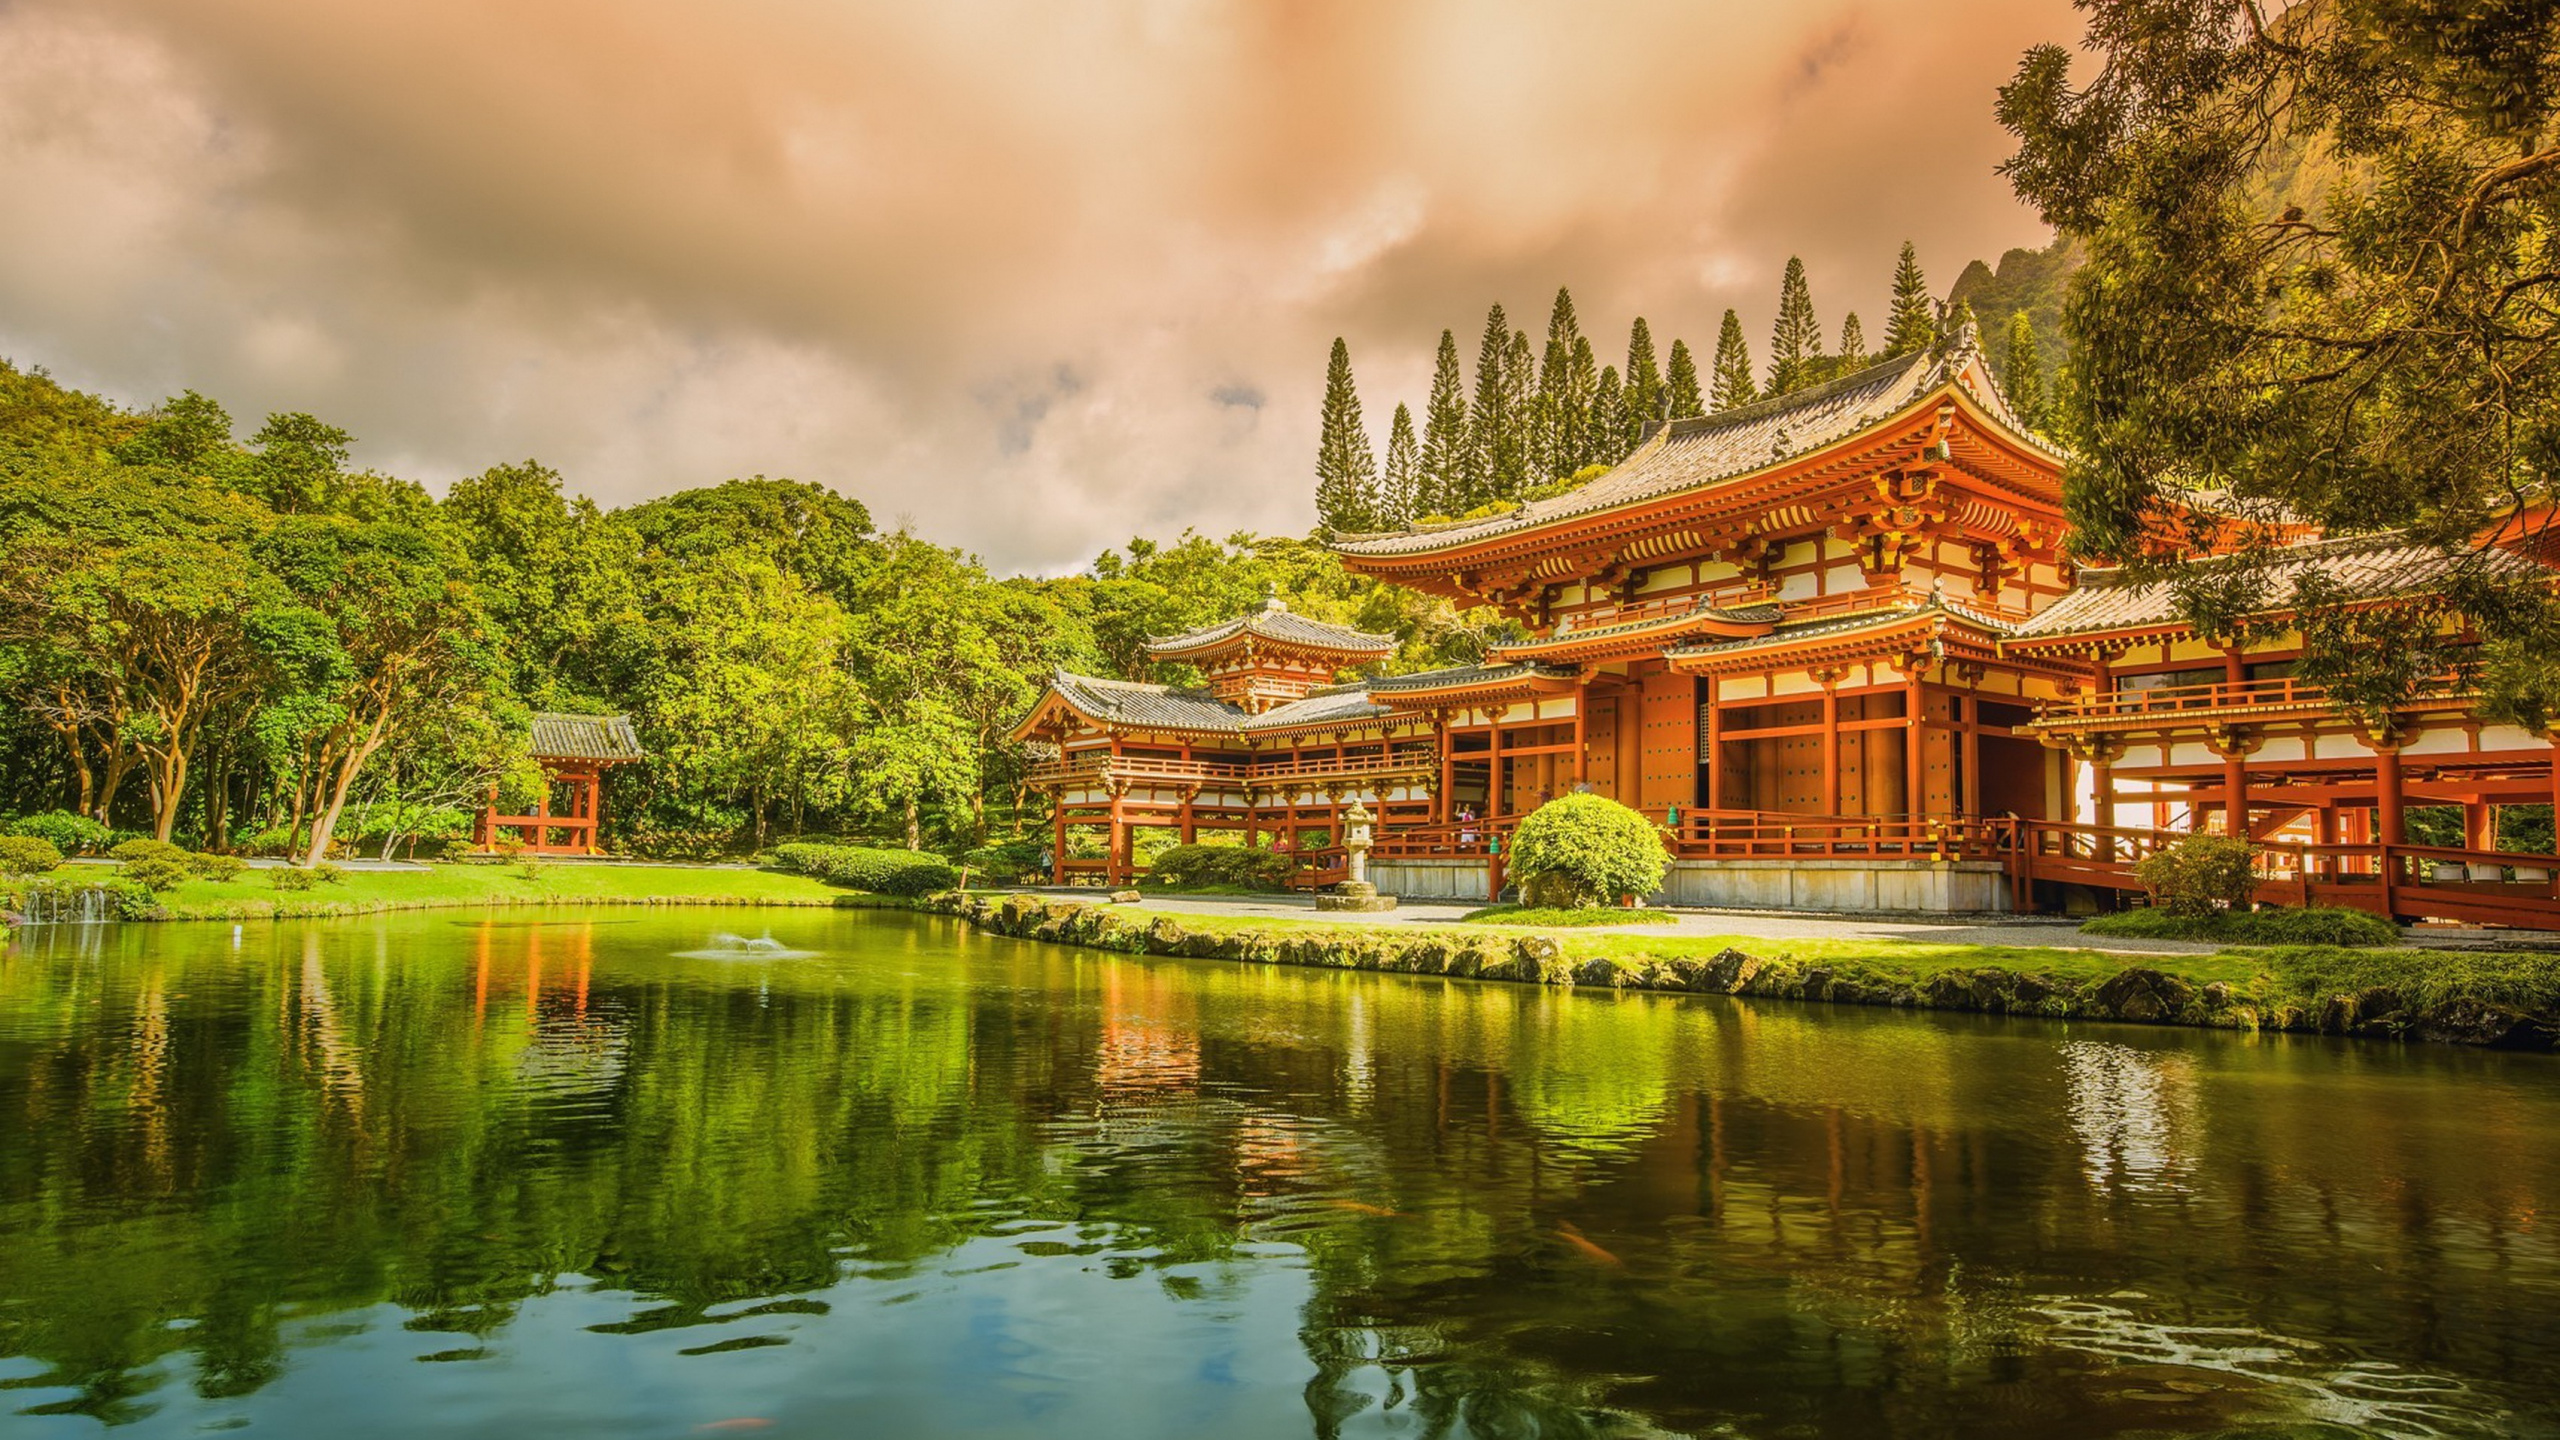 Brown and White Temple Near Green Trees and Lake Under Cloudy Sky During Daytime. Wallpaper in 2560x1440 Resolution